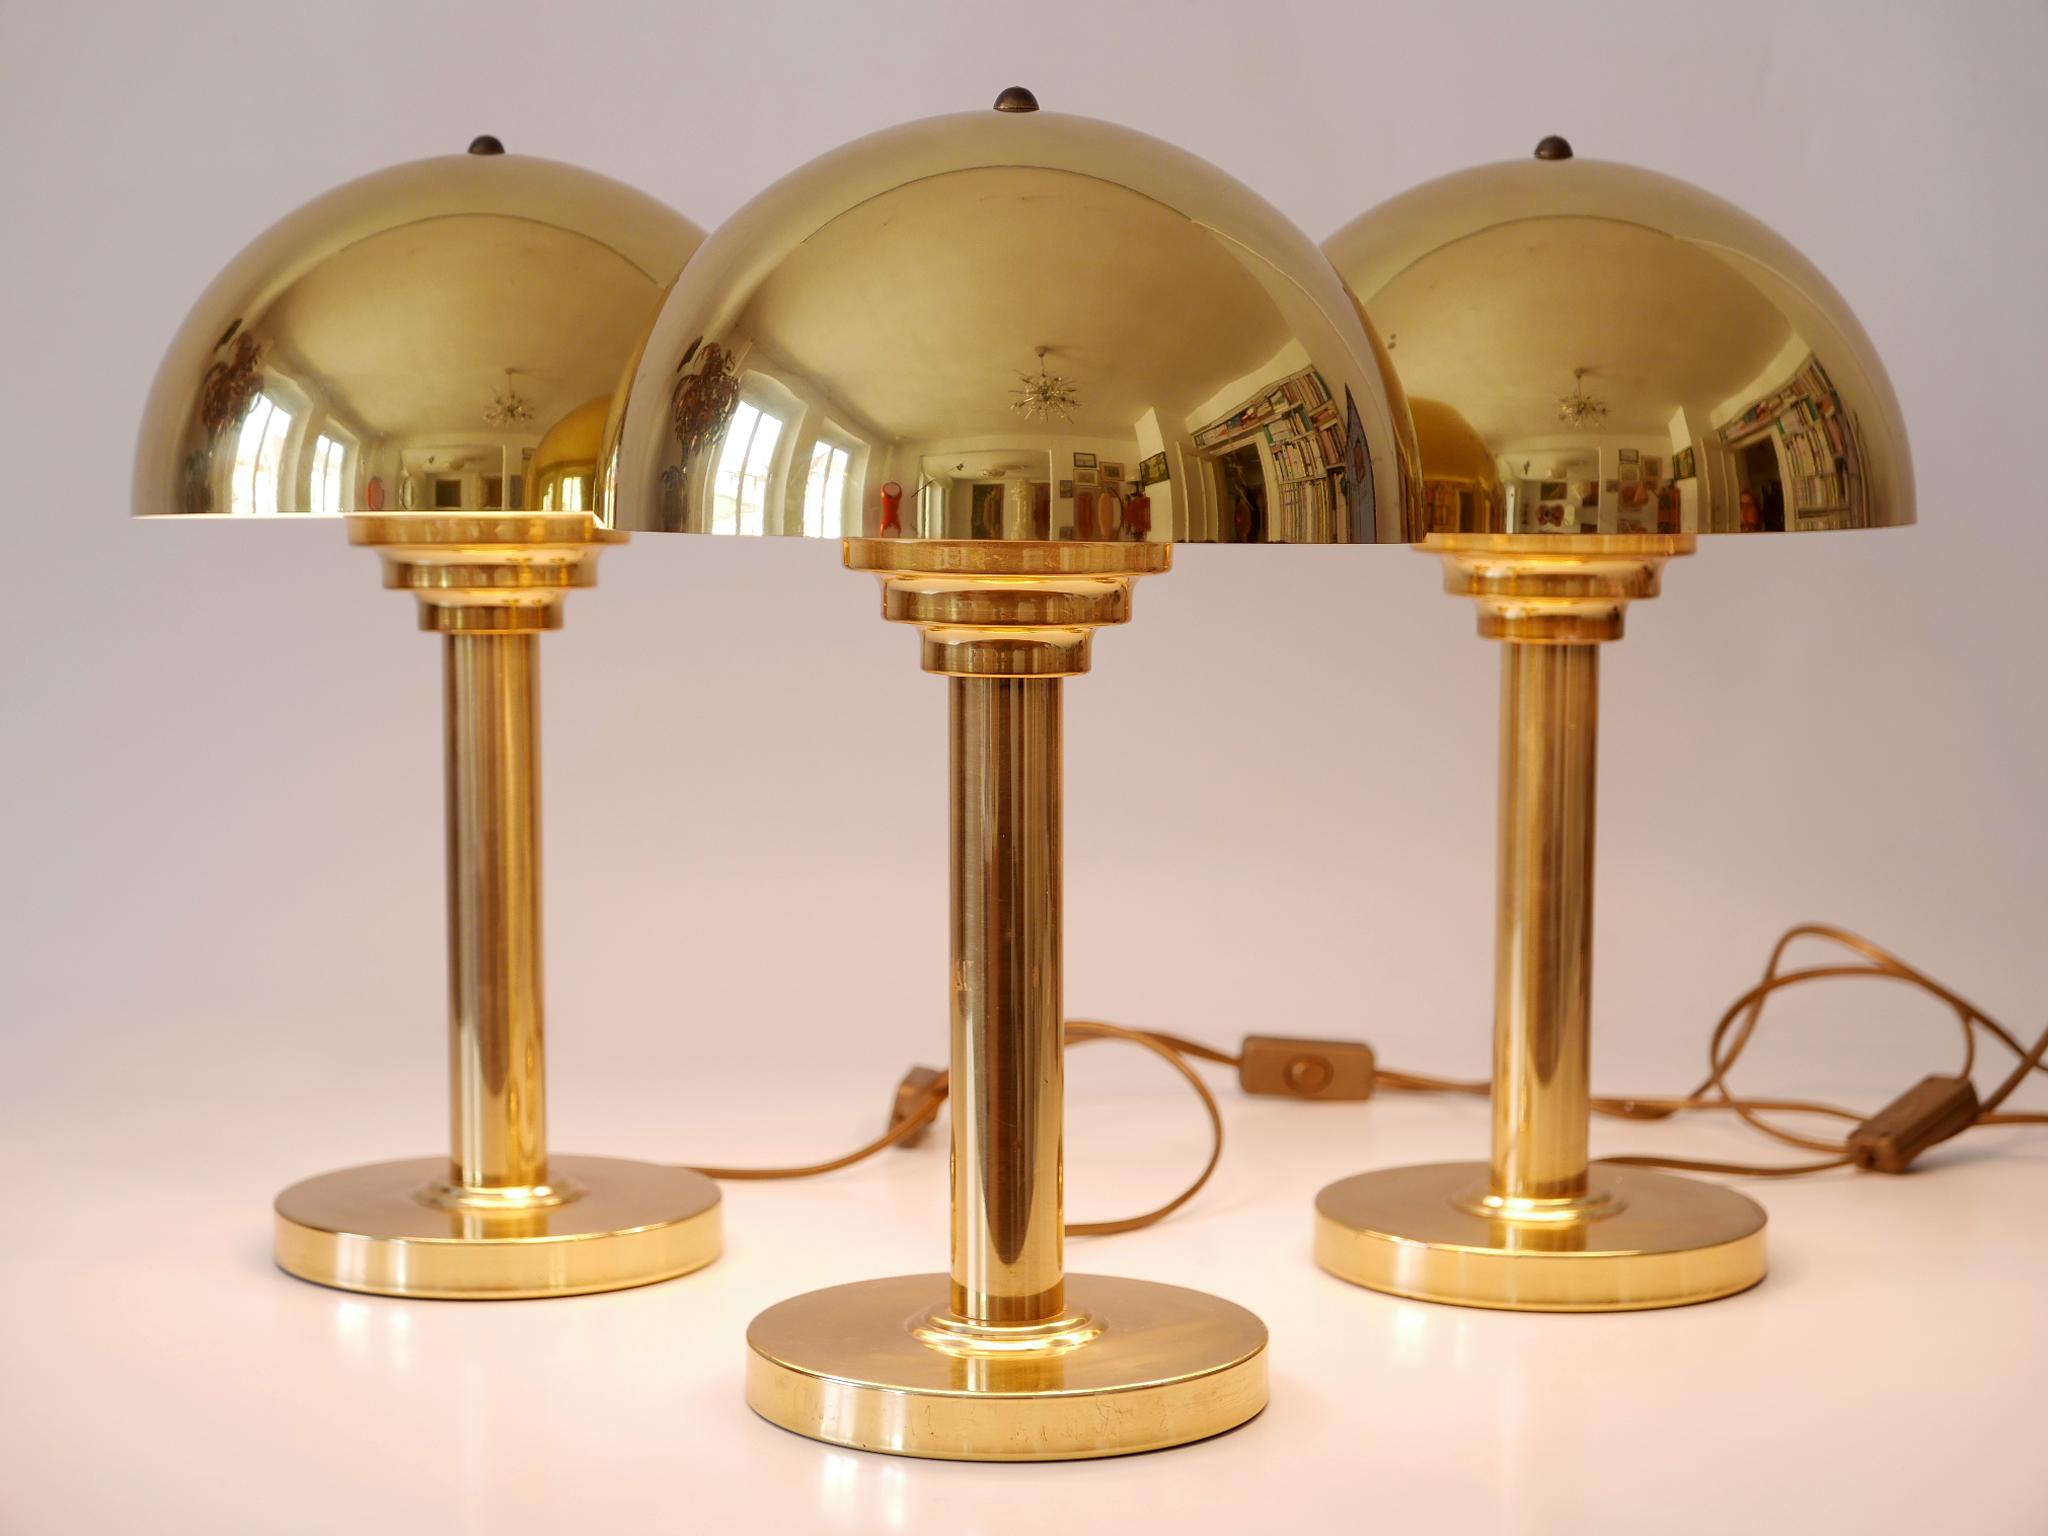 Elegant Mid-Century Modern Brass Table Lamps by WSB, Germany, 1960s For Sale 3